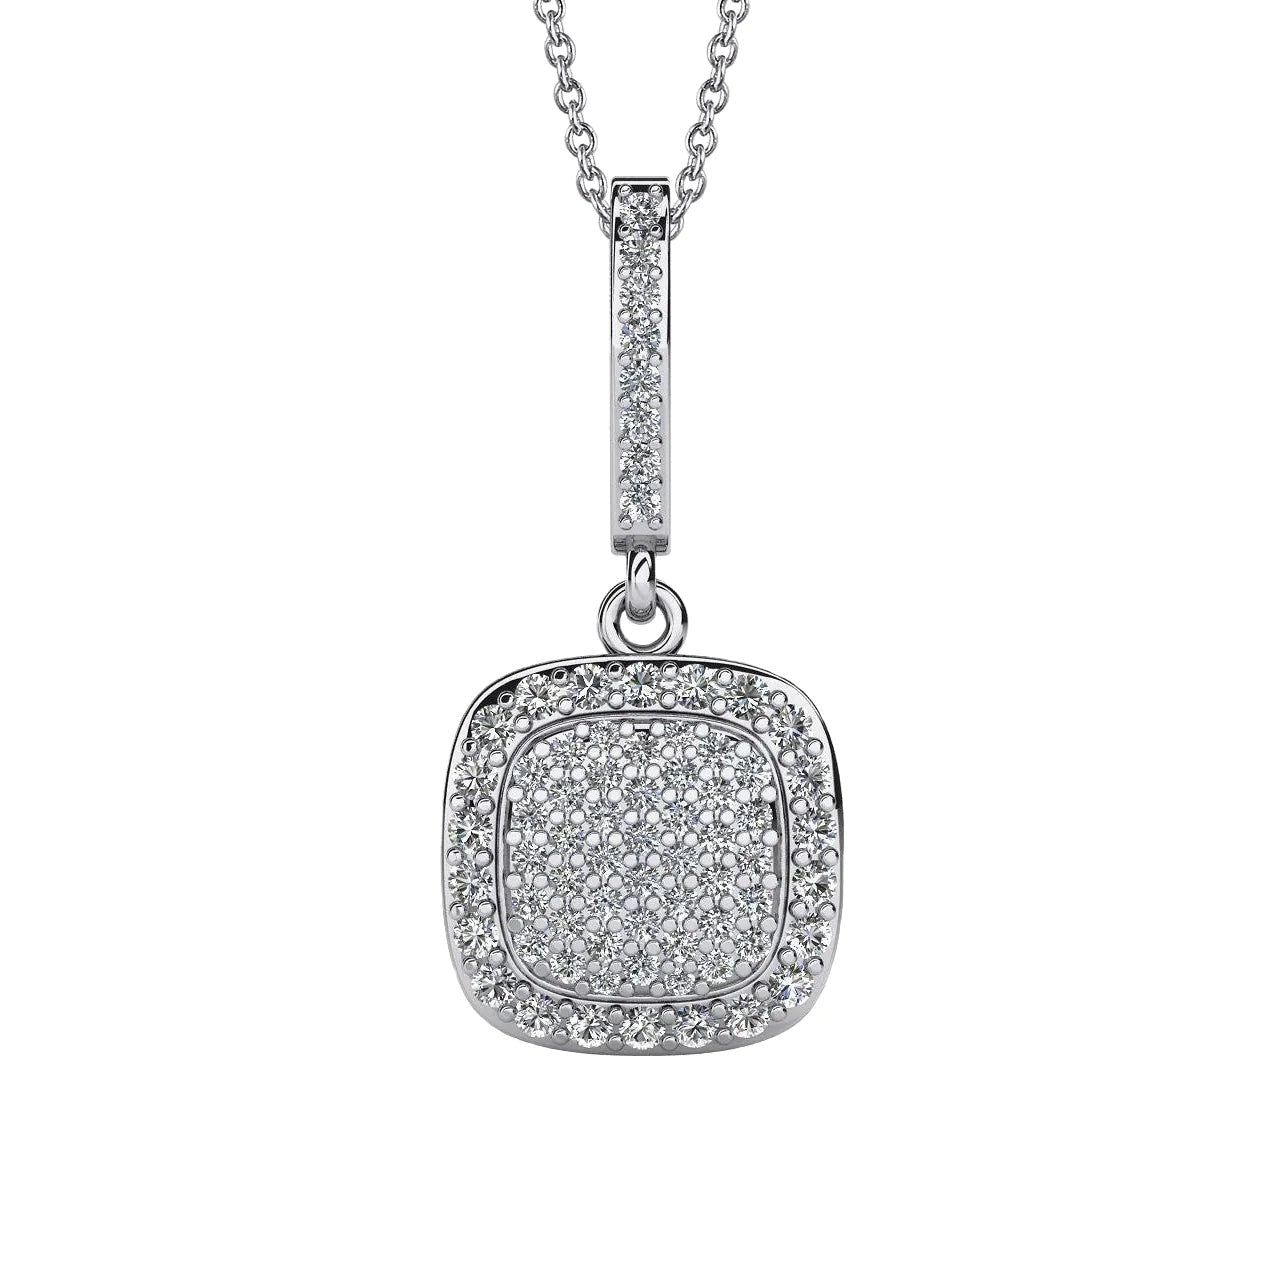 Sparkling Round Cut Real 7 Ct Diamonds Cluster Pendant Necklace White Gold - Pendant-harrychadent.ca